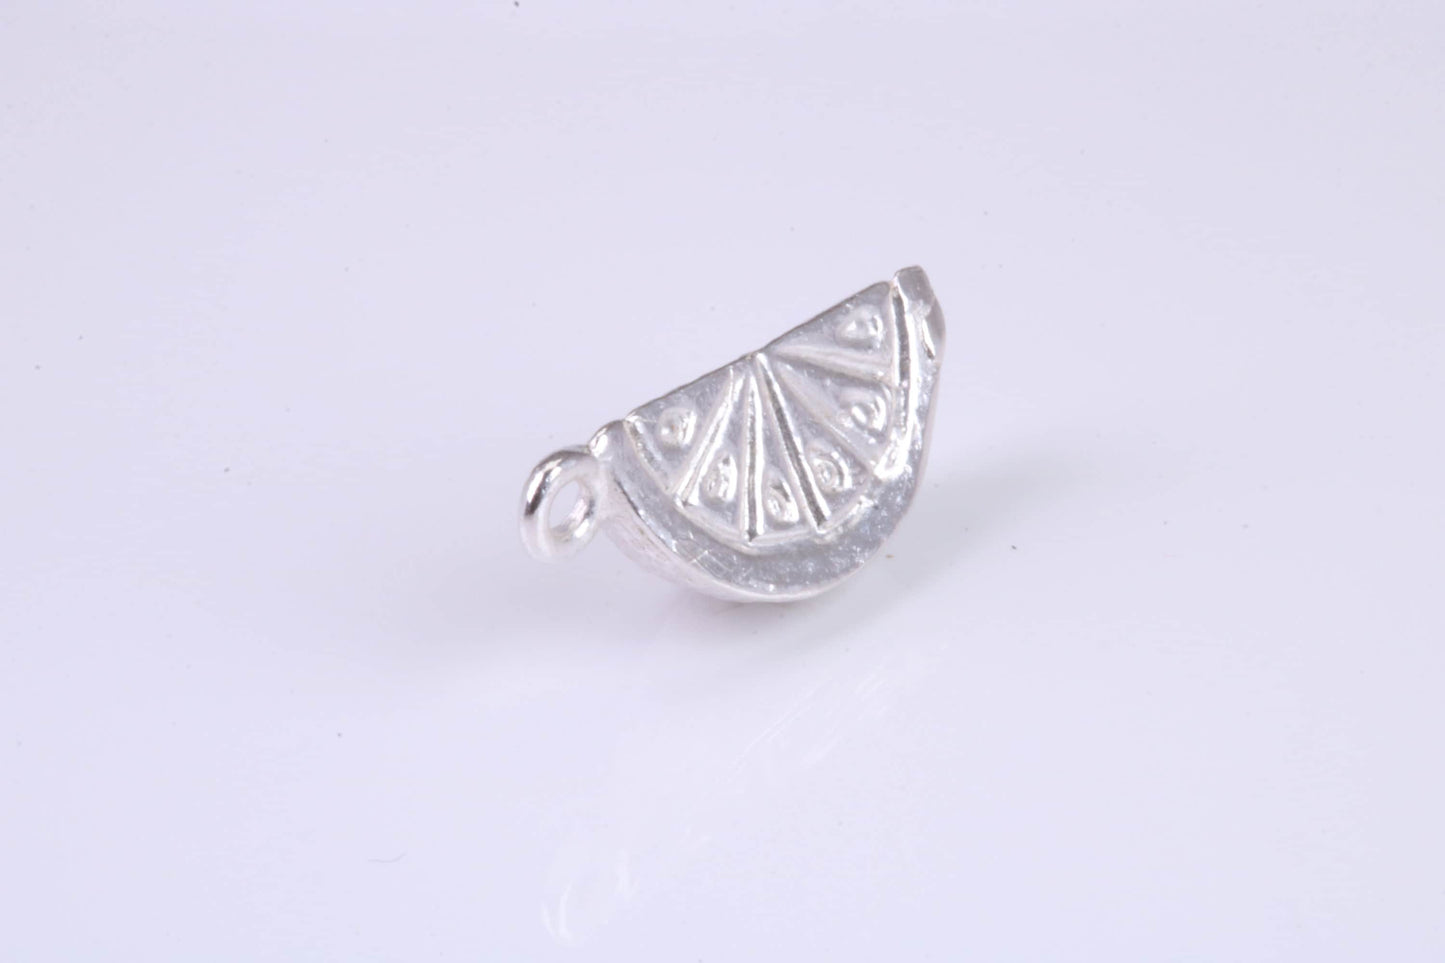 Slice of Melon Charm, Traditional Charm, Made from Solid 925 Grade Sterling Silver, Complete with Attachment Link